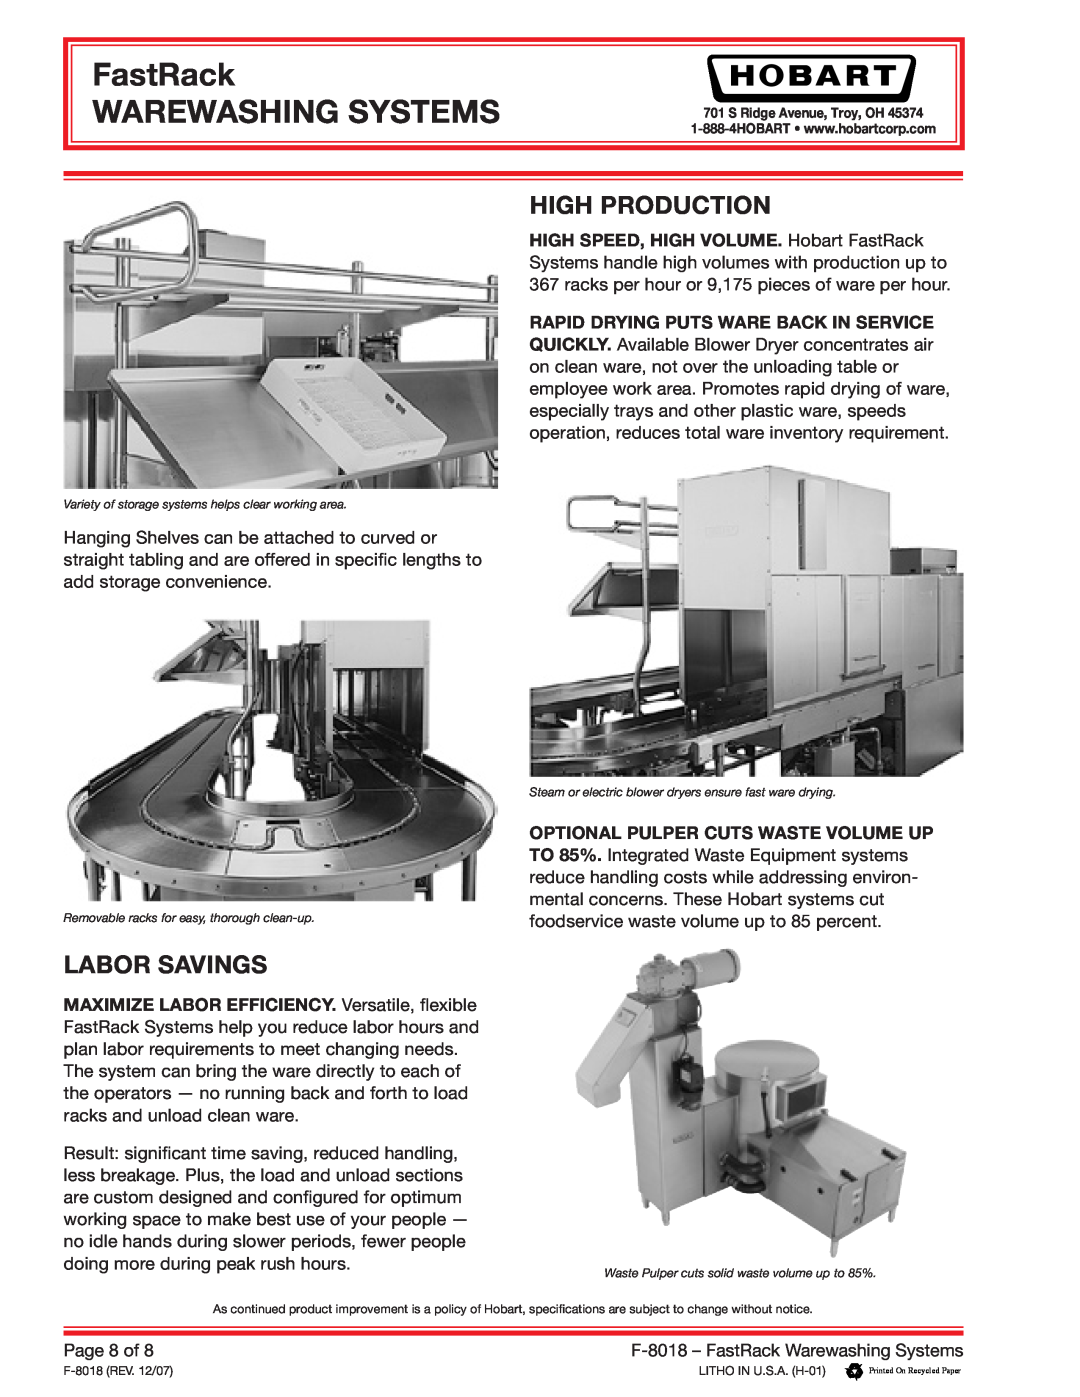 Hobart F-8018 specifications High Production, Labor Savings, FastRack WAREWASHING SYSTEMS 